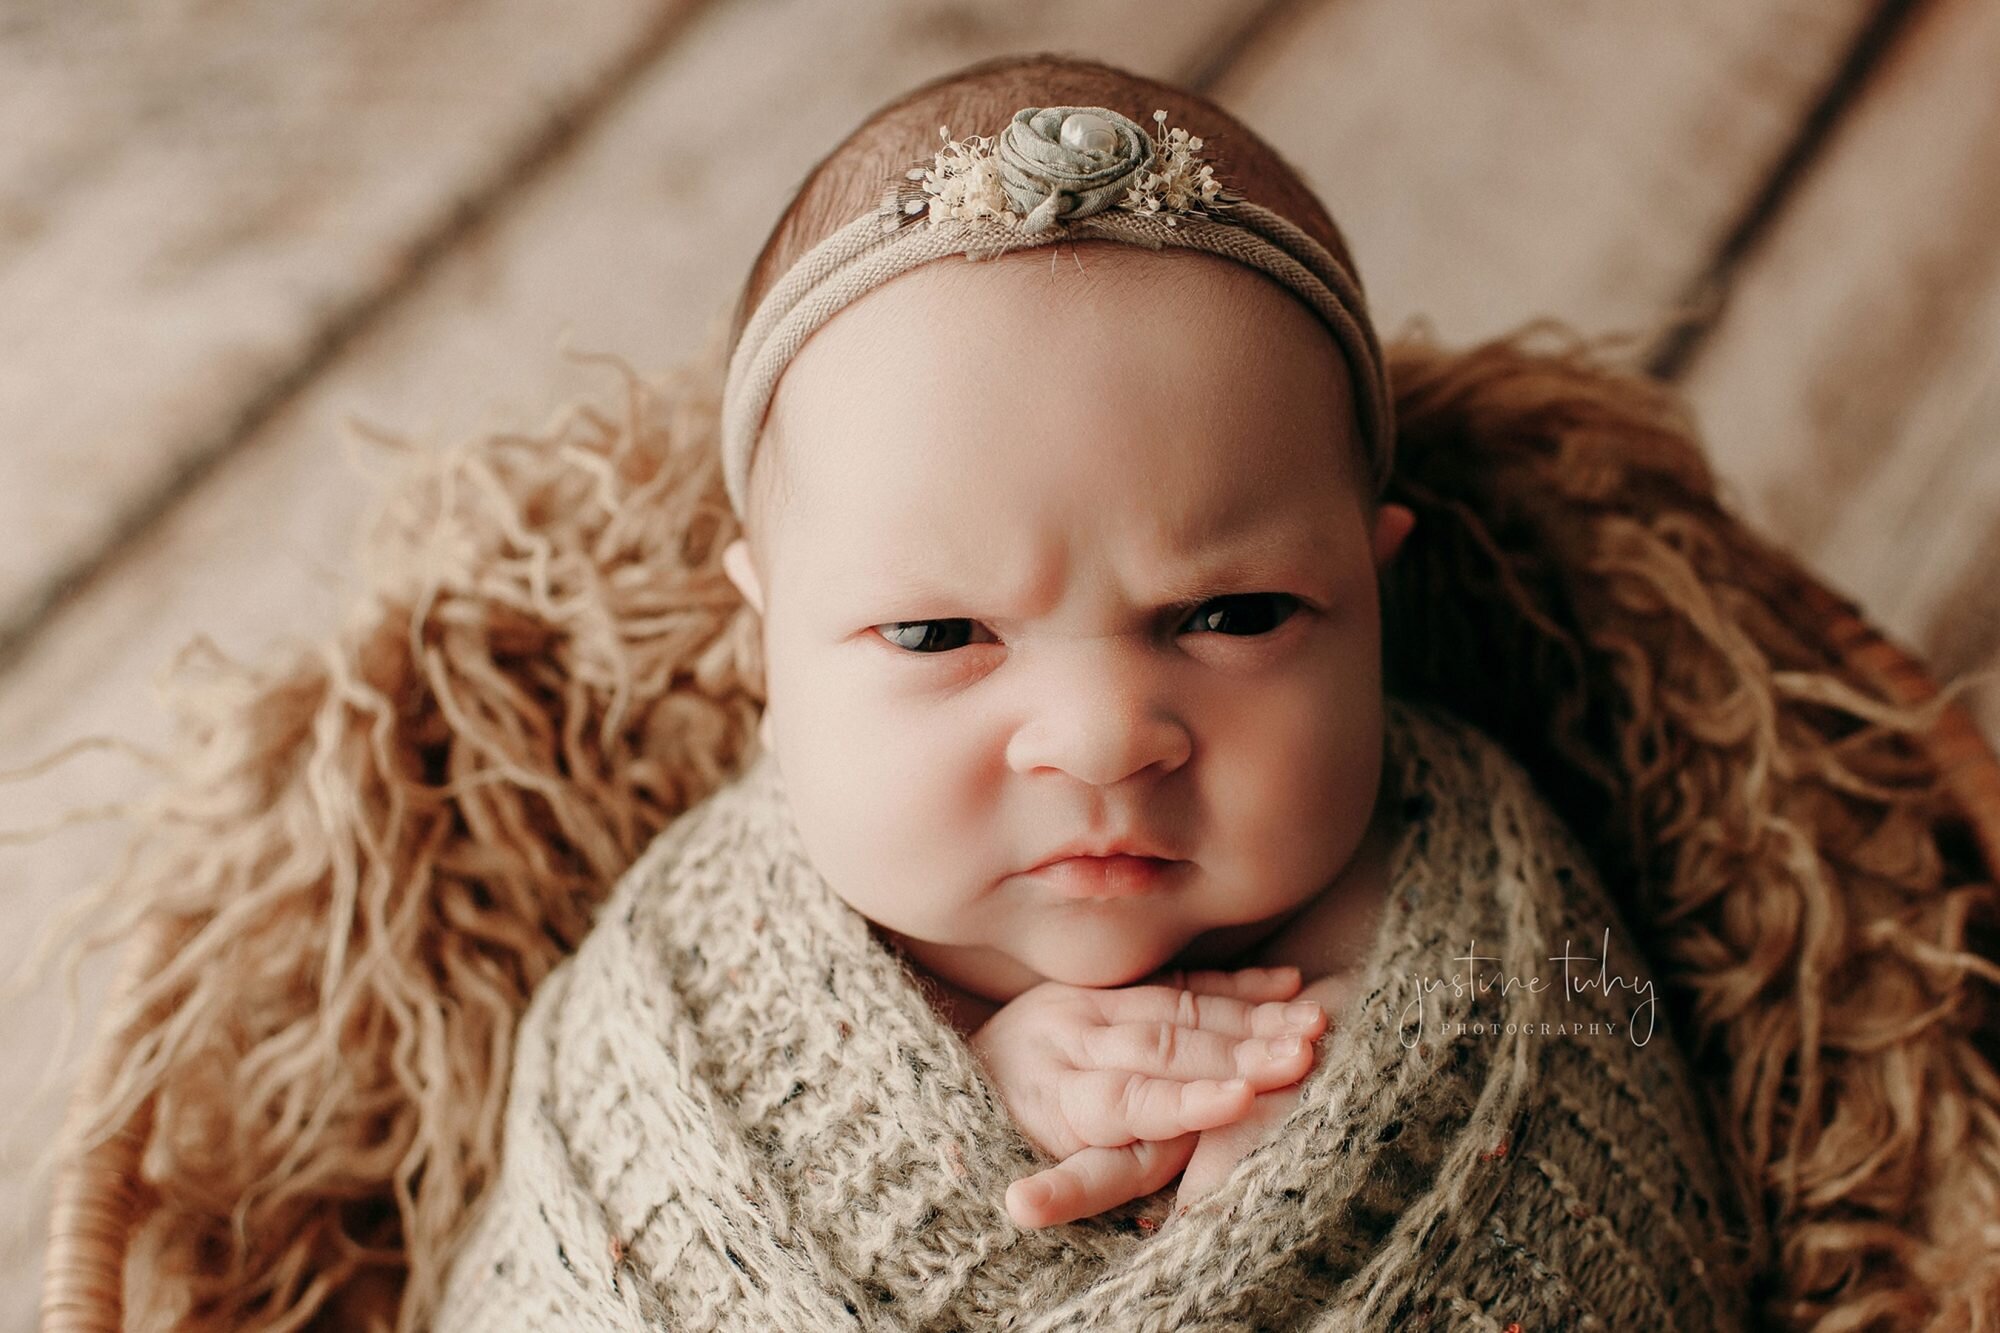 Mean Mugging' Baby Doesn't Seem To Want Photo Taken